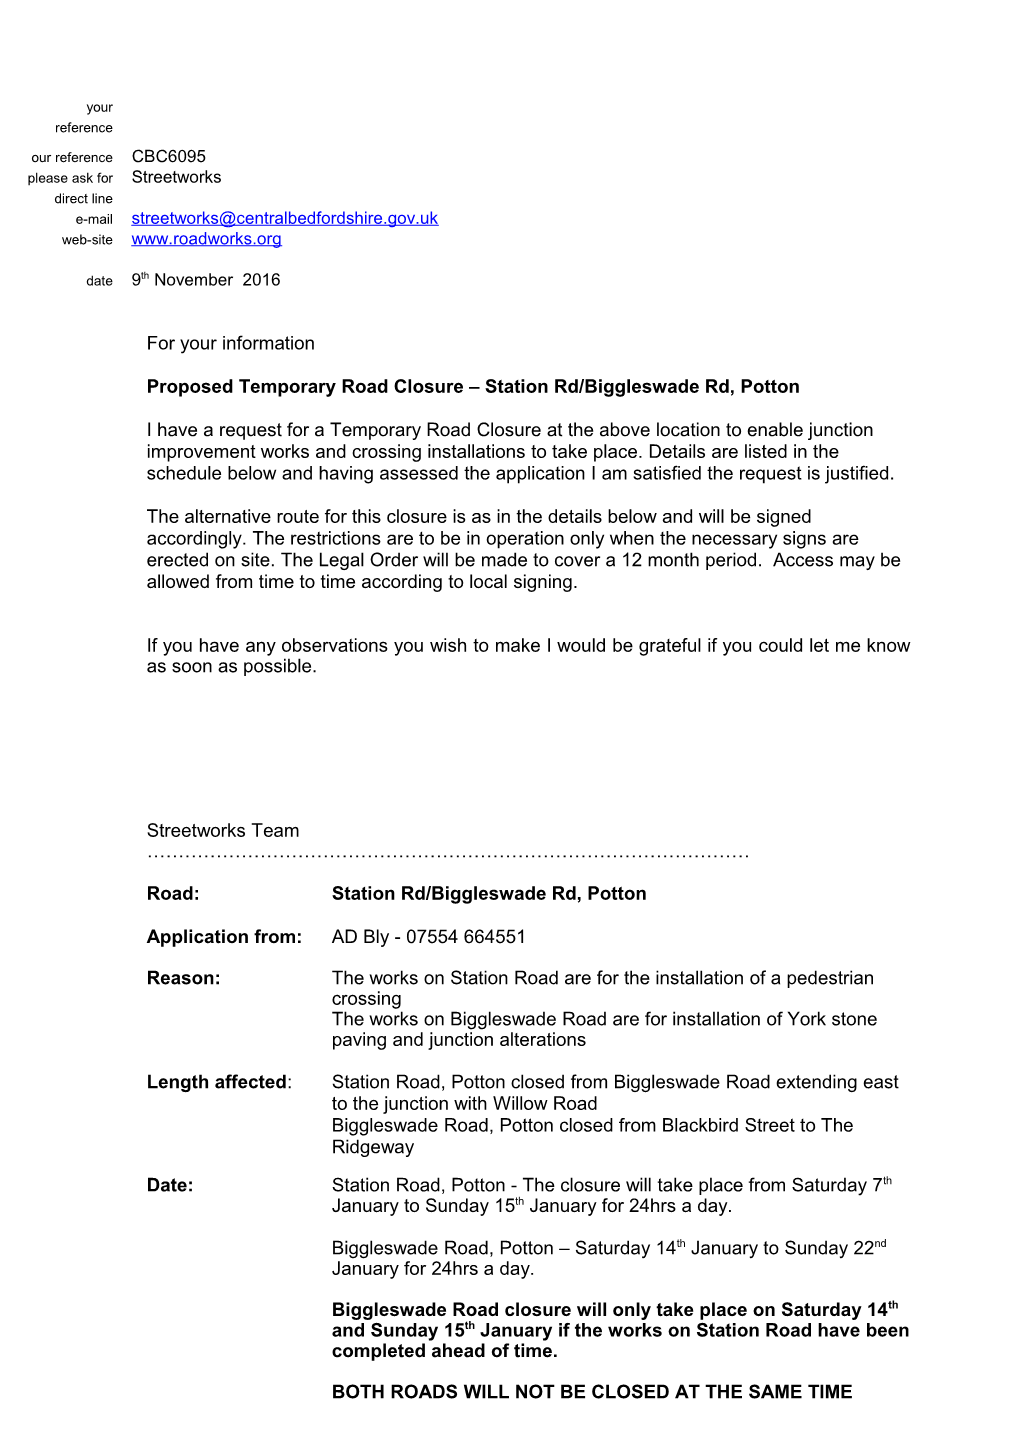 Proposed Temporary Roadclosure Station Rd/Biggleswade Rd, Potton